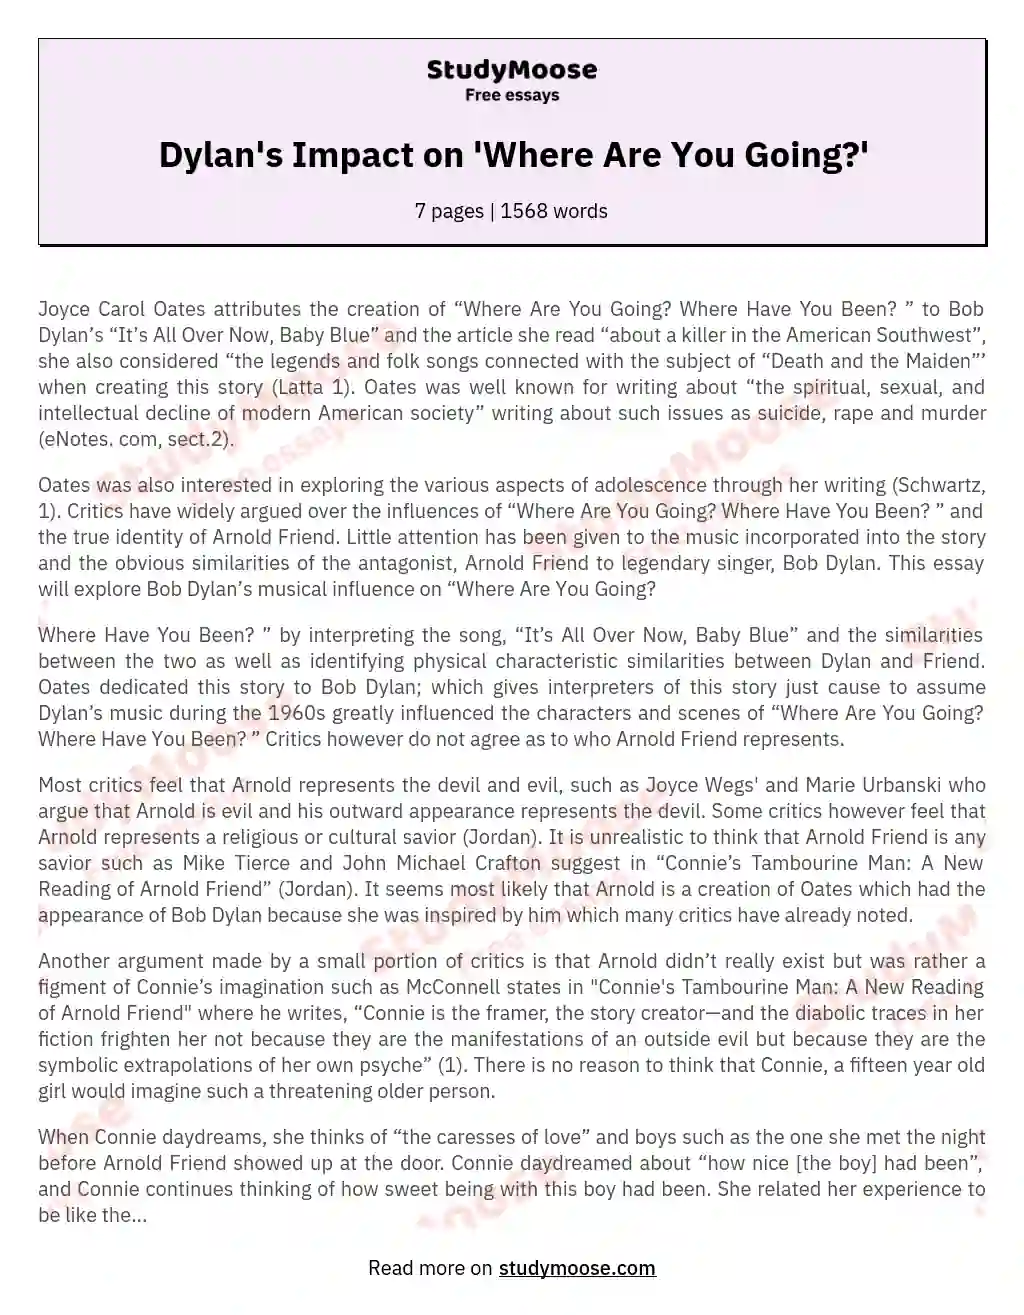 Dylan's Impact on 'Where Are You Going?' essay